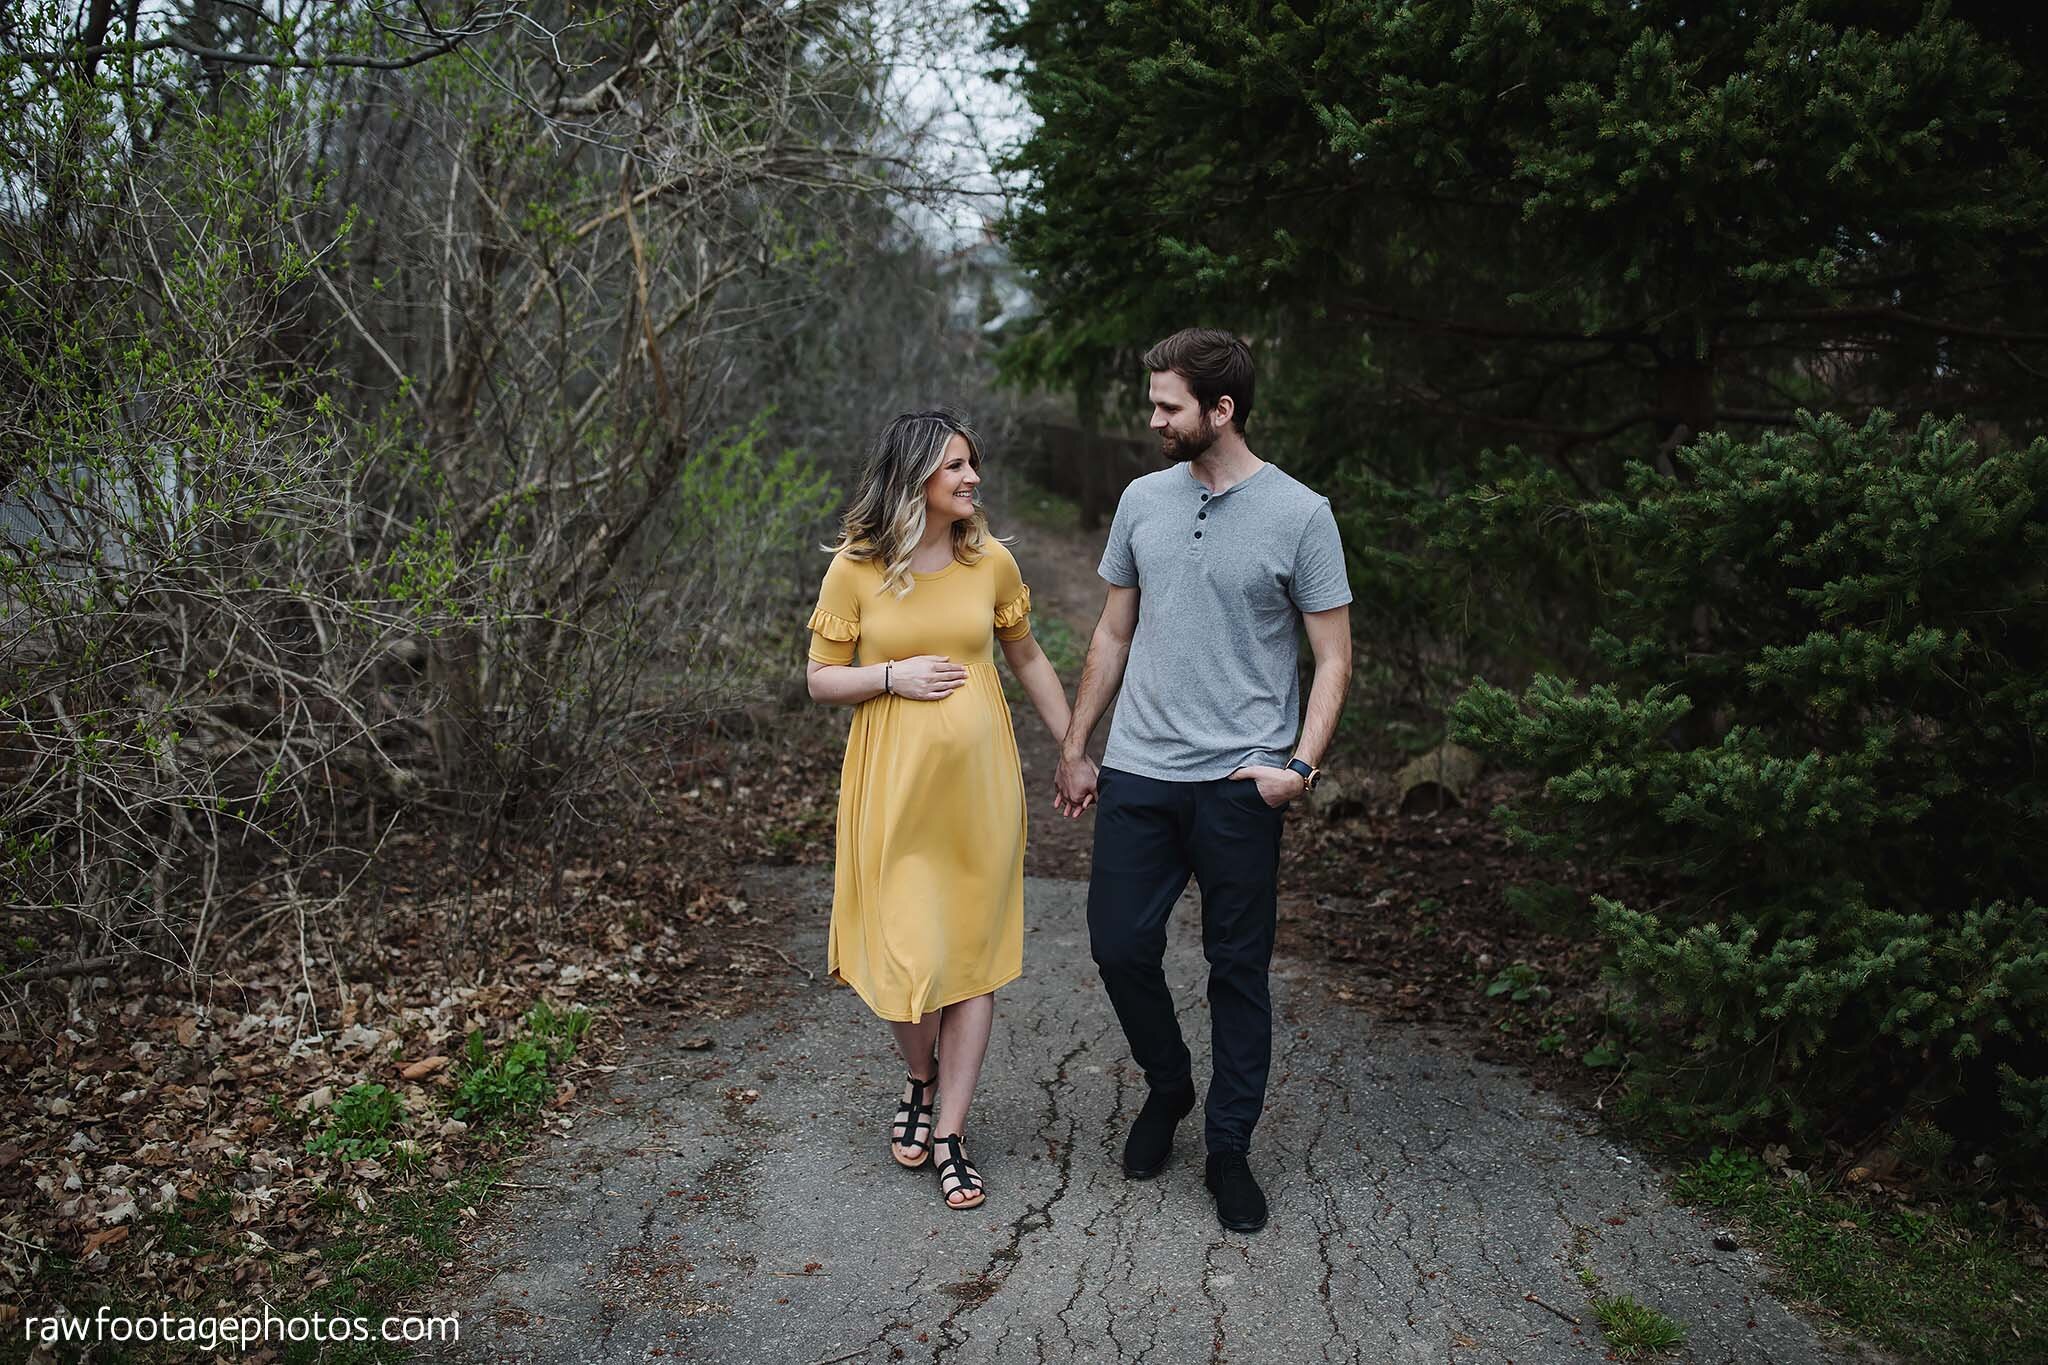 london_ontario_maternity_photographer-raw_footage_photography-in_home_lifestyle_maternity-forest_maternity_session-yellow_maternity_dress_023.jpg